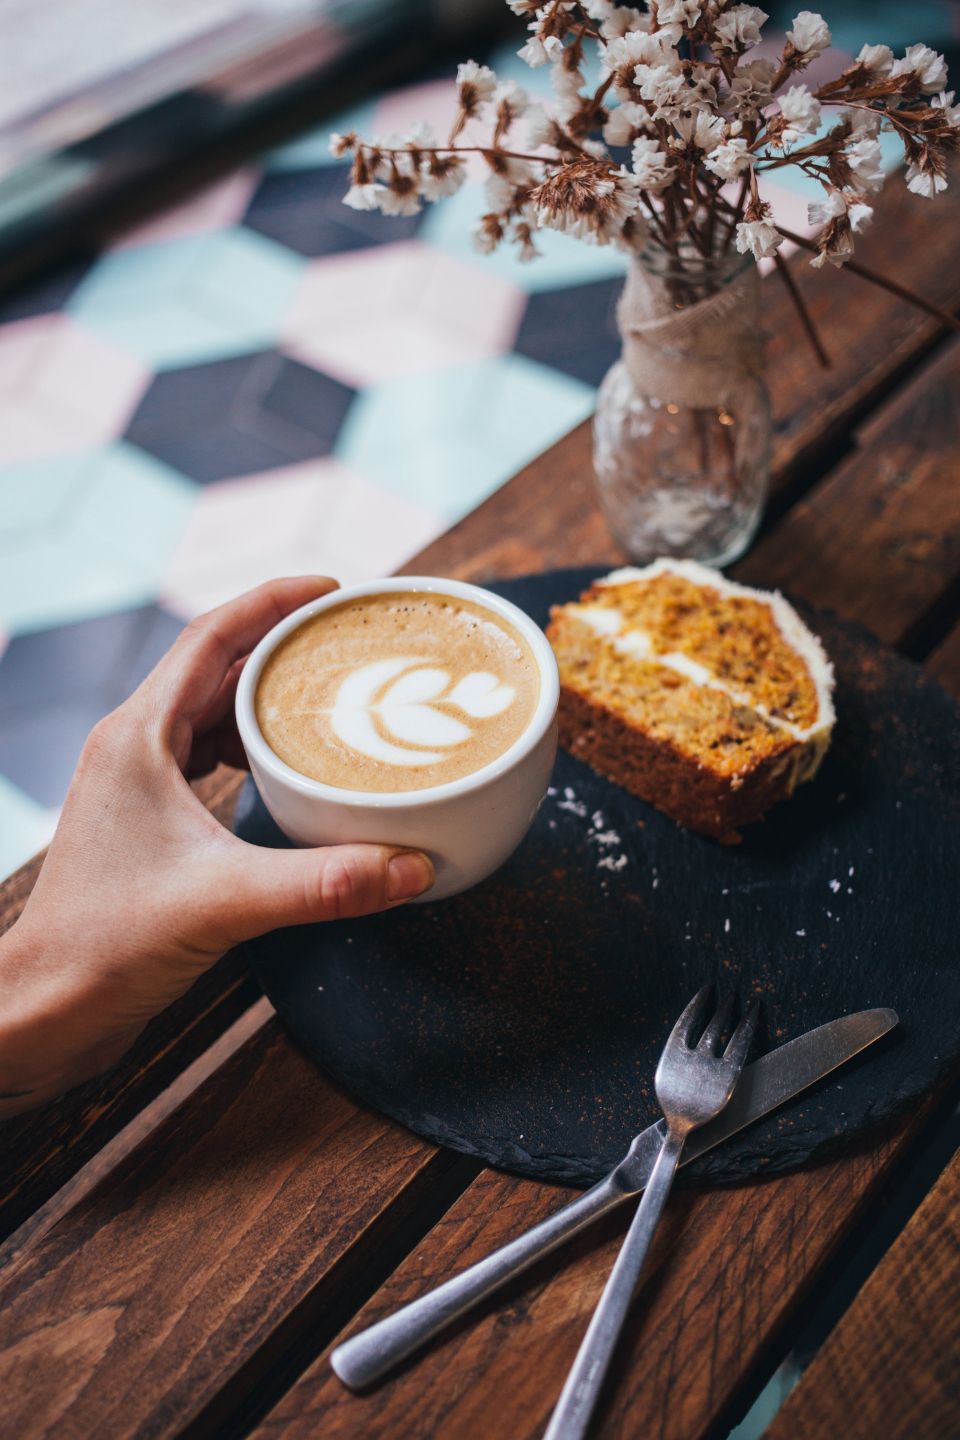 a person picks up a latte off of a platter that has utensils and a slice of carrot cake